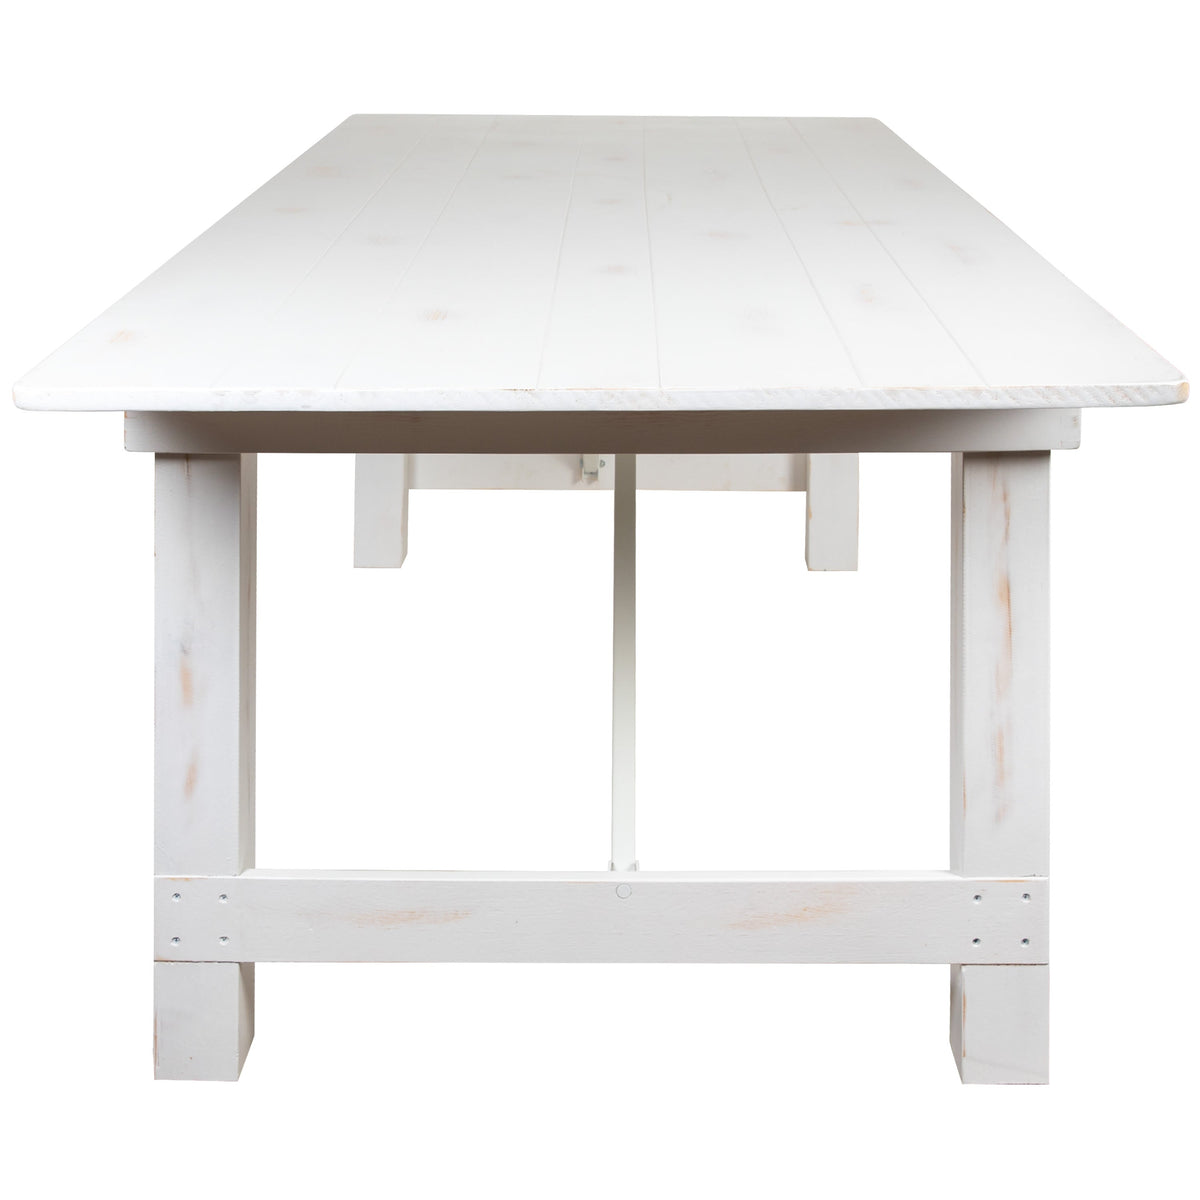 Antique Rustic White |#| 7 Piece Set-8' x 40inch Antique Rustic White Folding Farm Table and Six Bench Set